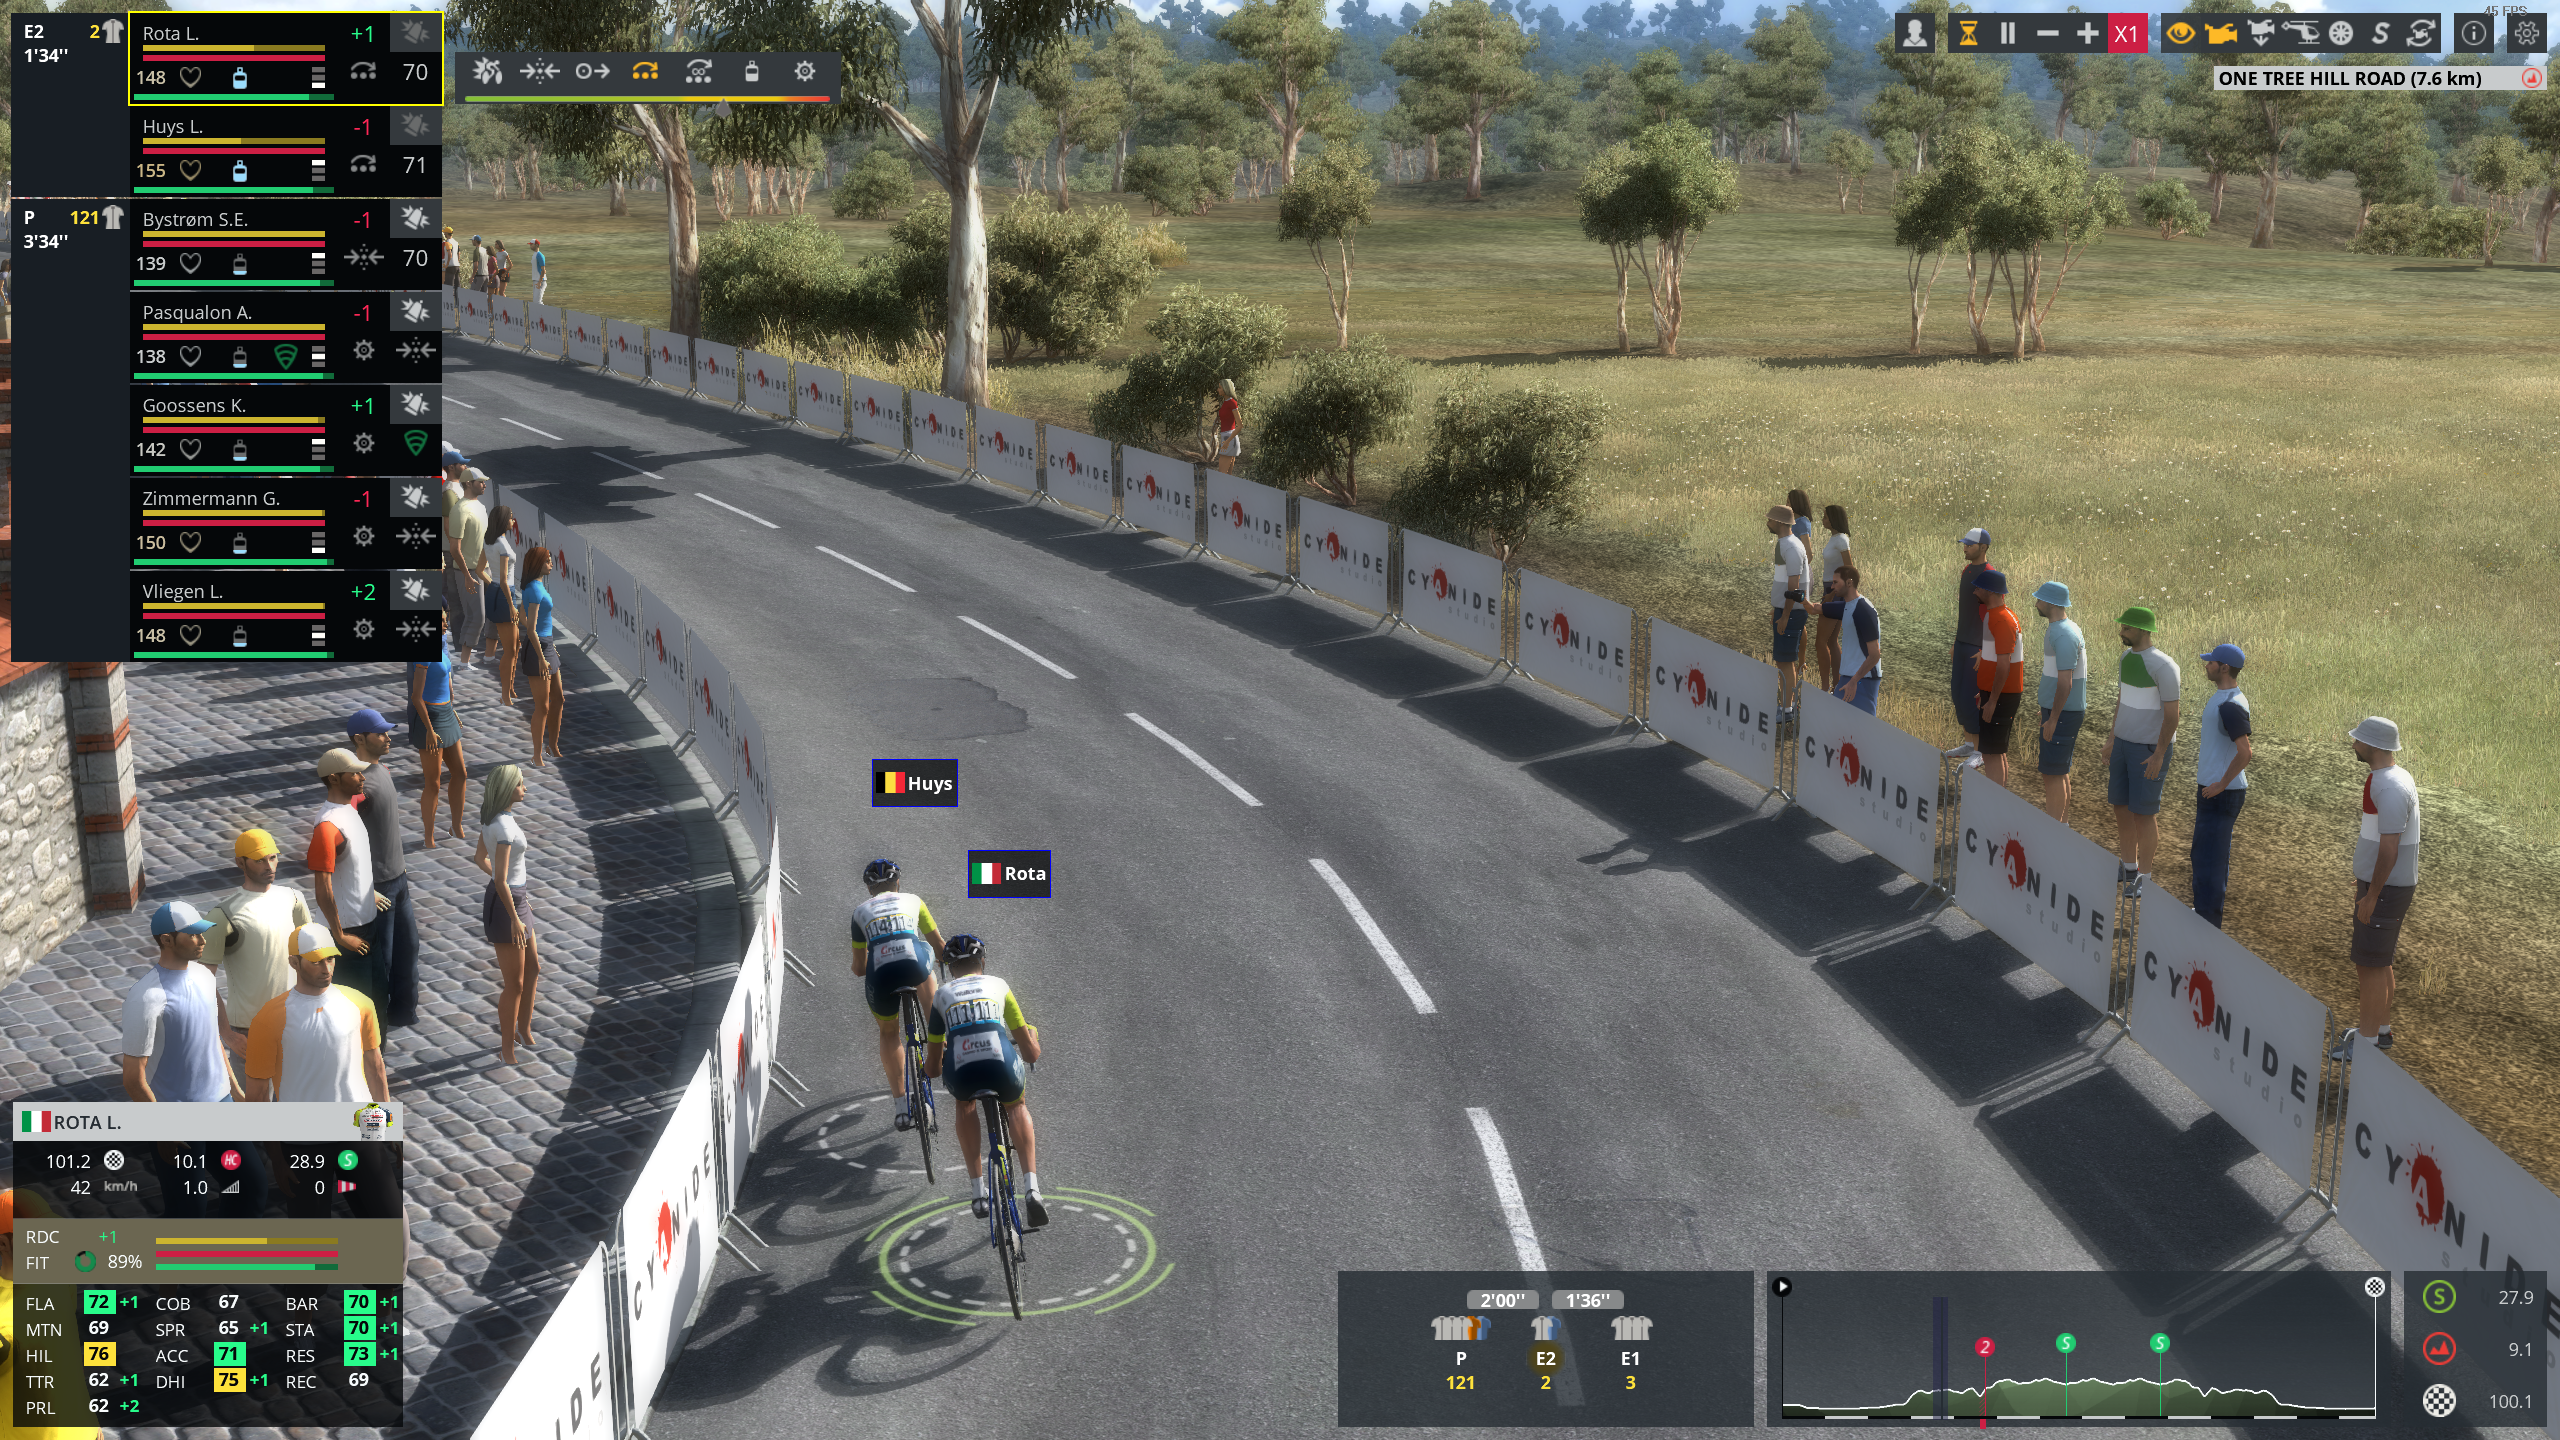 Pro Cycling Manager 2023  Launch Trailer 